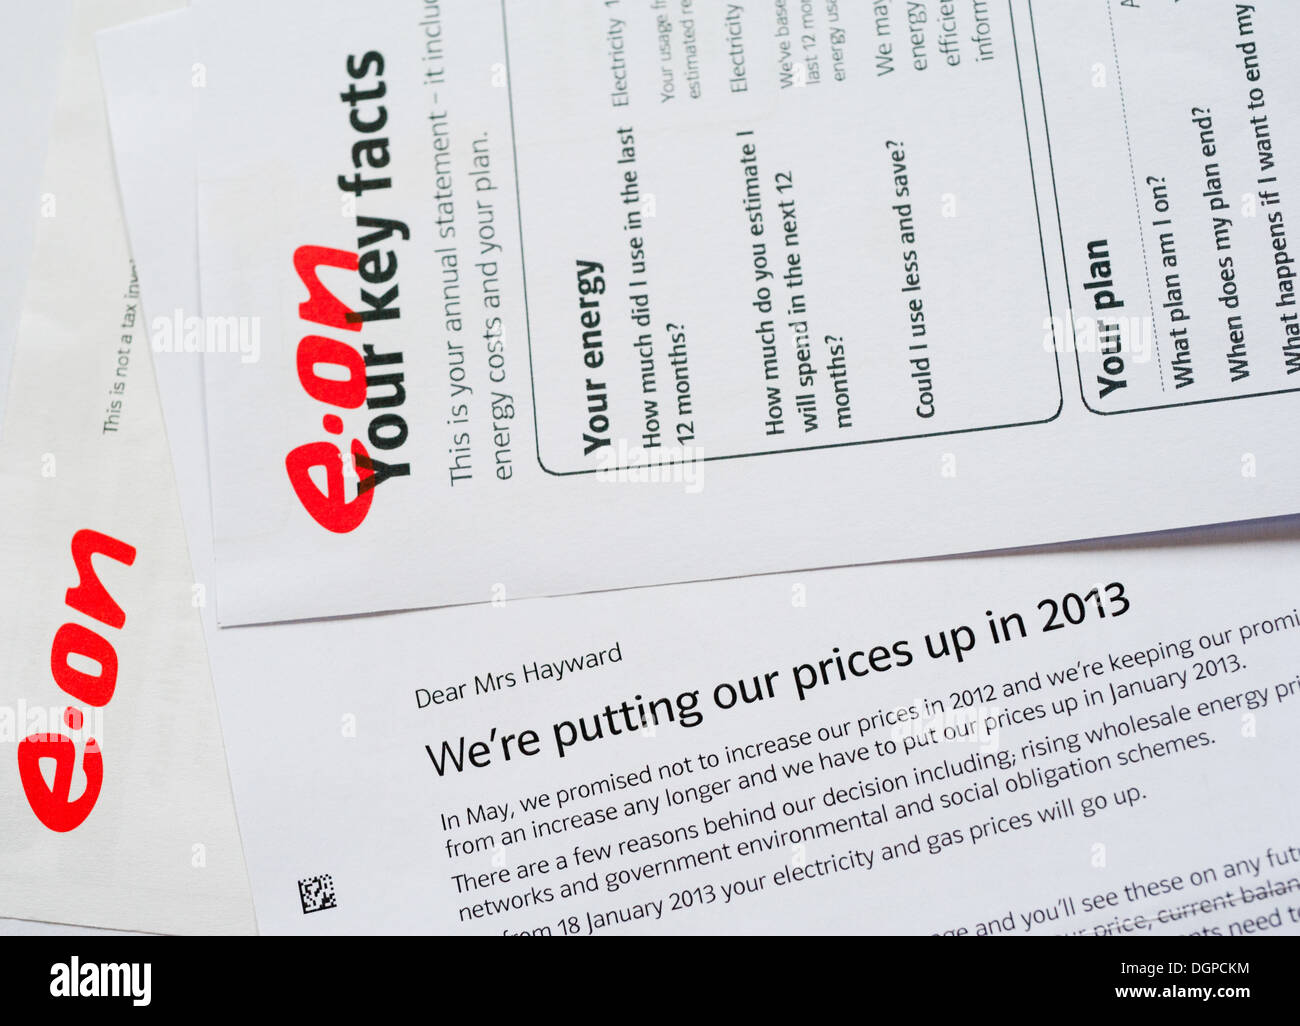 E.ON letters announcing energy price rise in 2013 Stock Photo